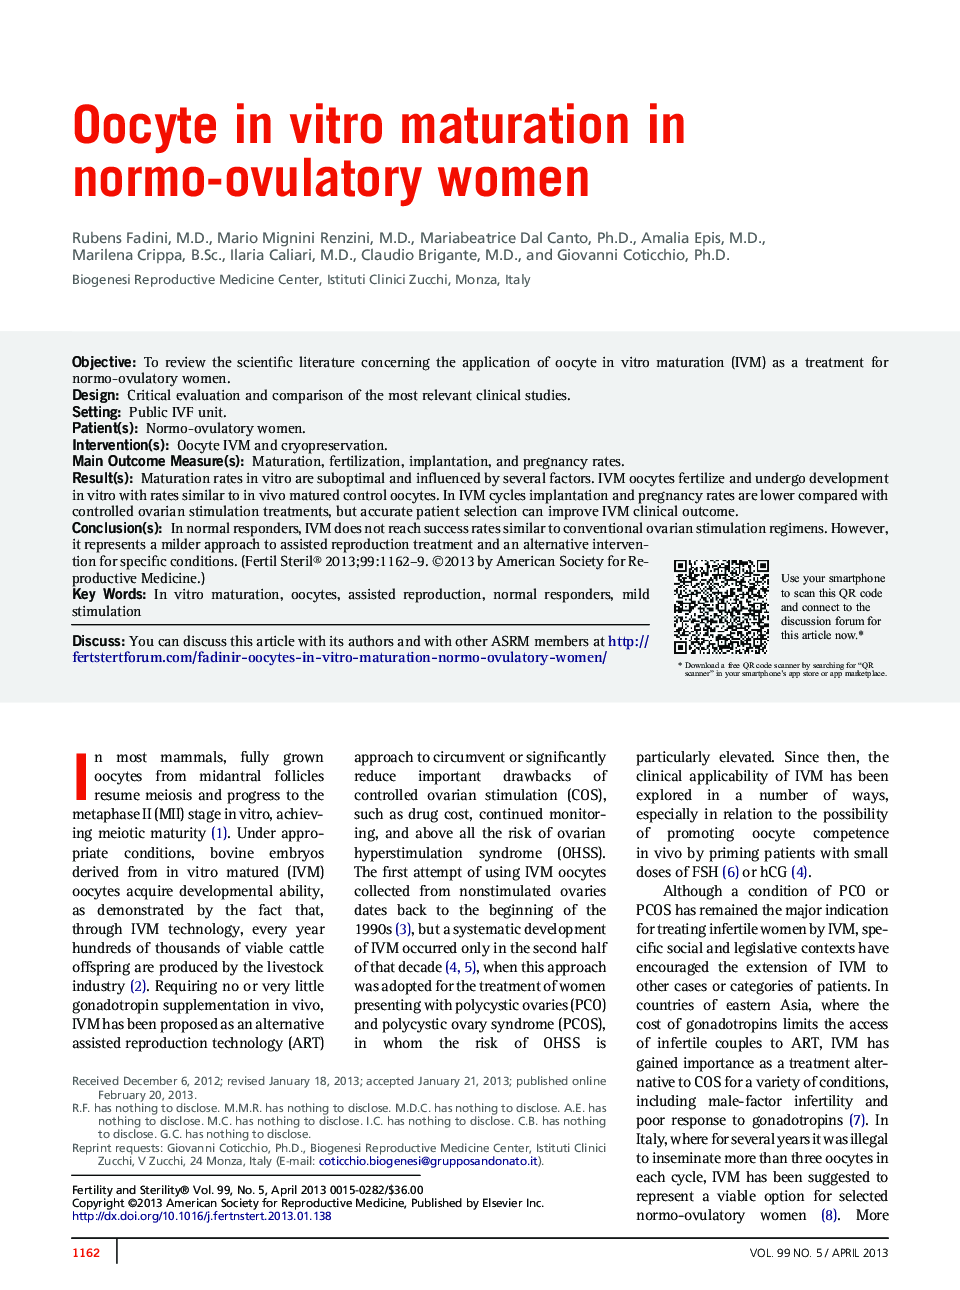 Oocyte in vitro maturation in normo-ovulatory women 